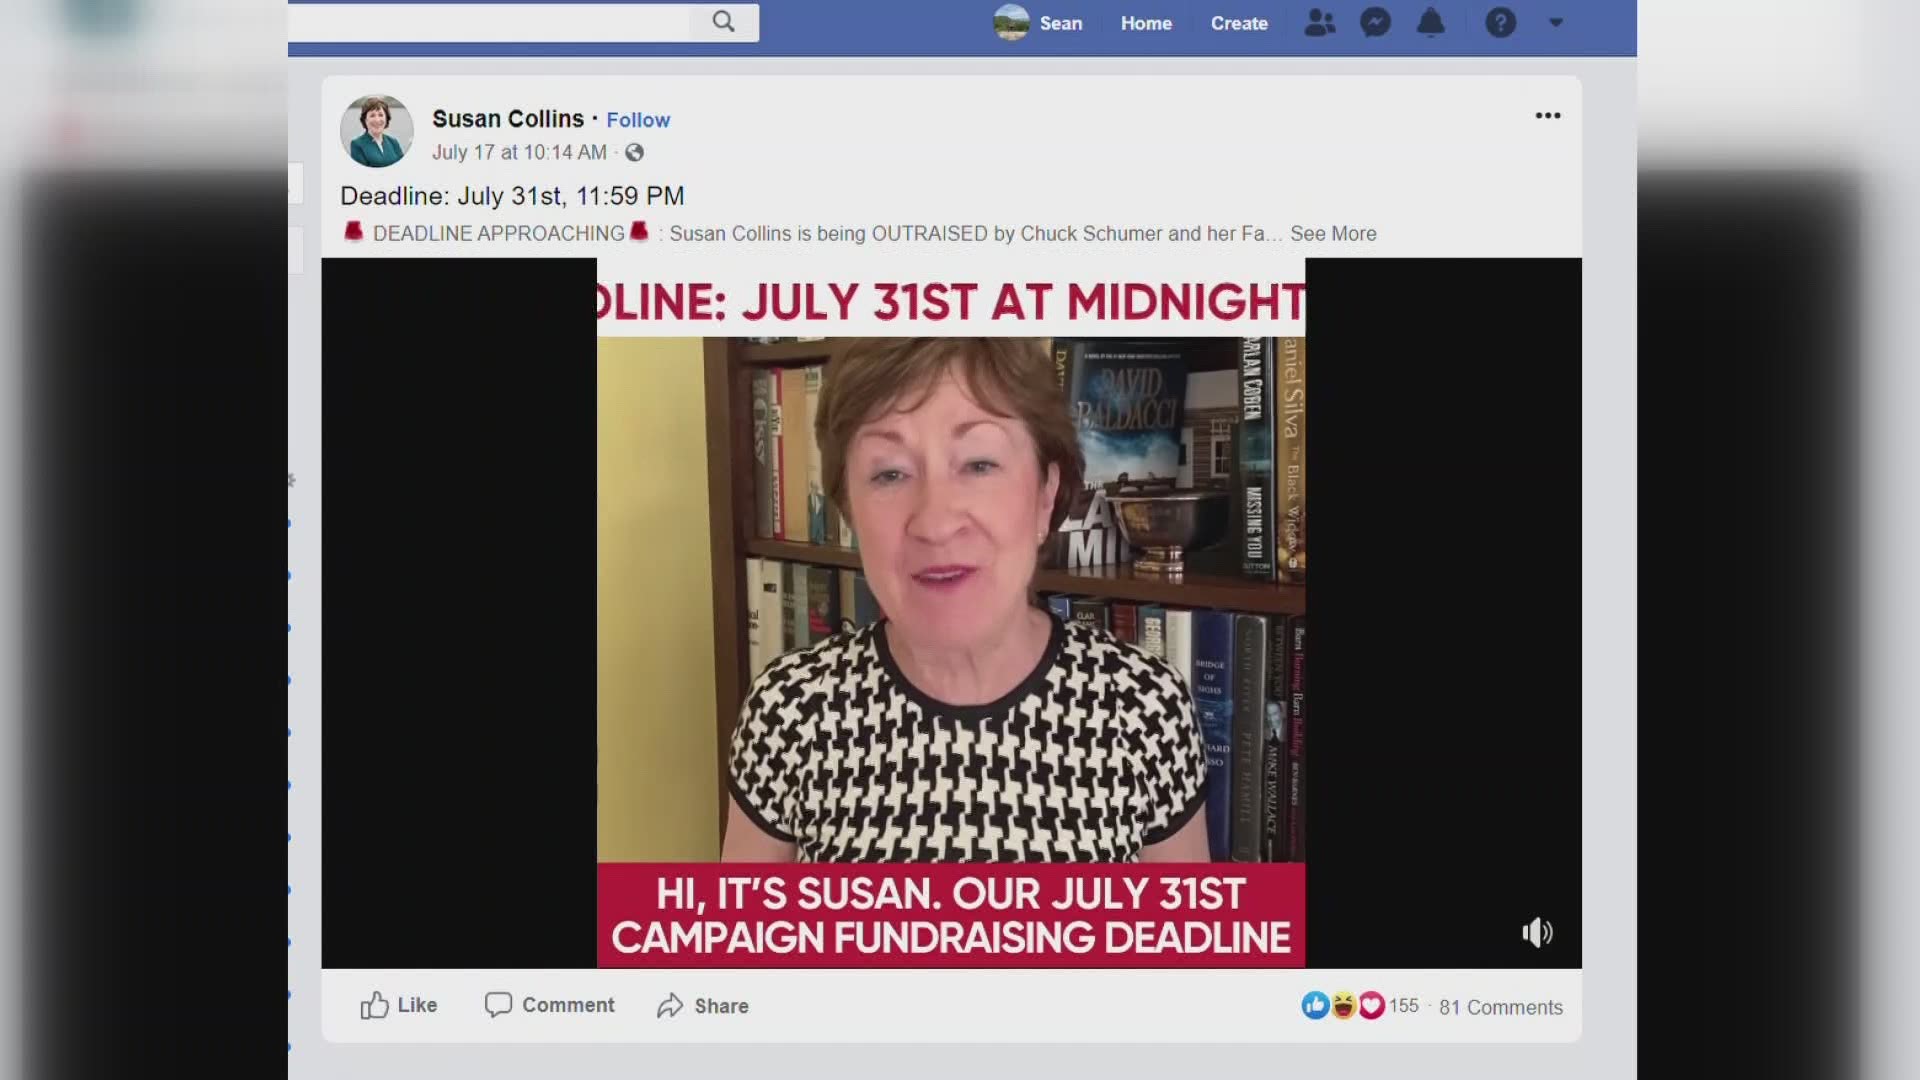 Both the Collins and Gideon campaigns have spent hundreds of thousand of dollars on social media advertisements ahead of Maine's race for U.S. Senate